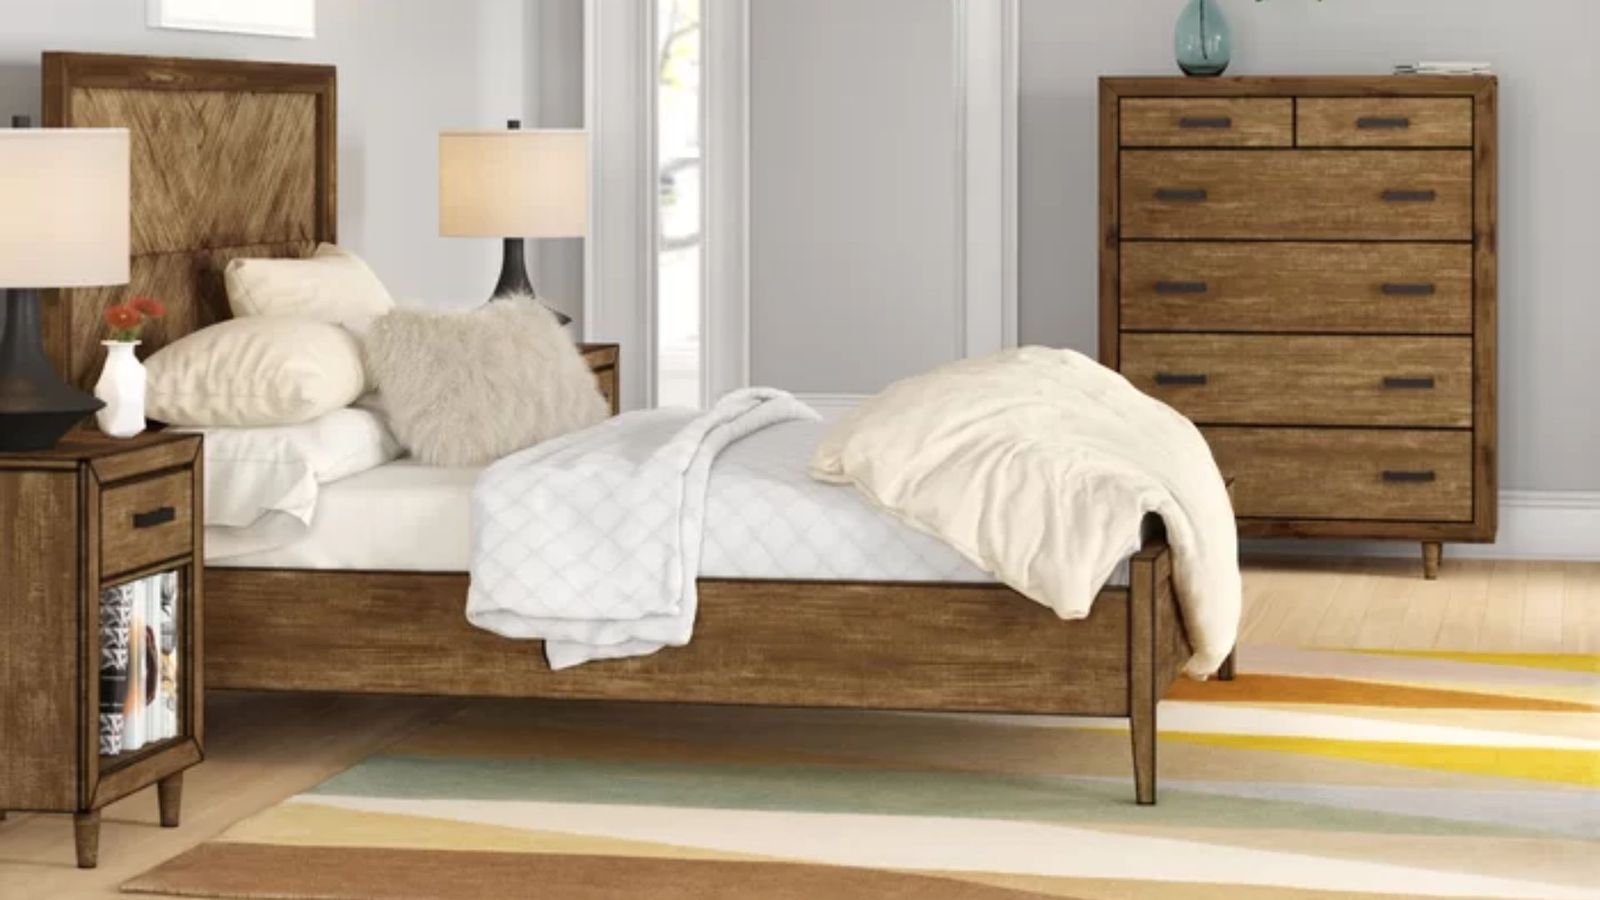 best places to buy bedroom furniture